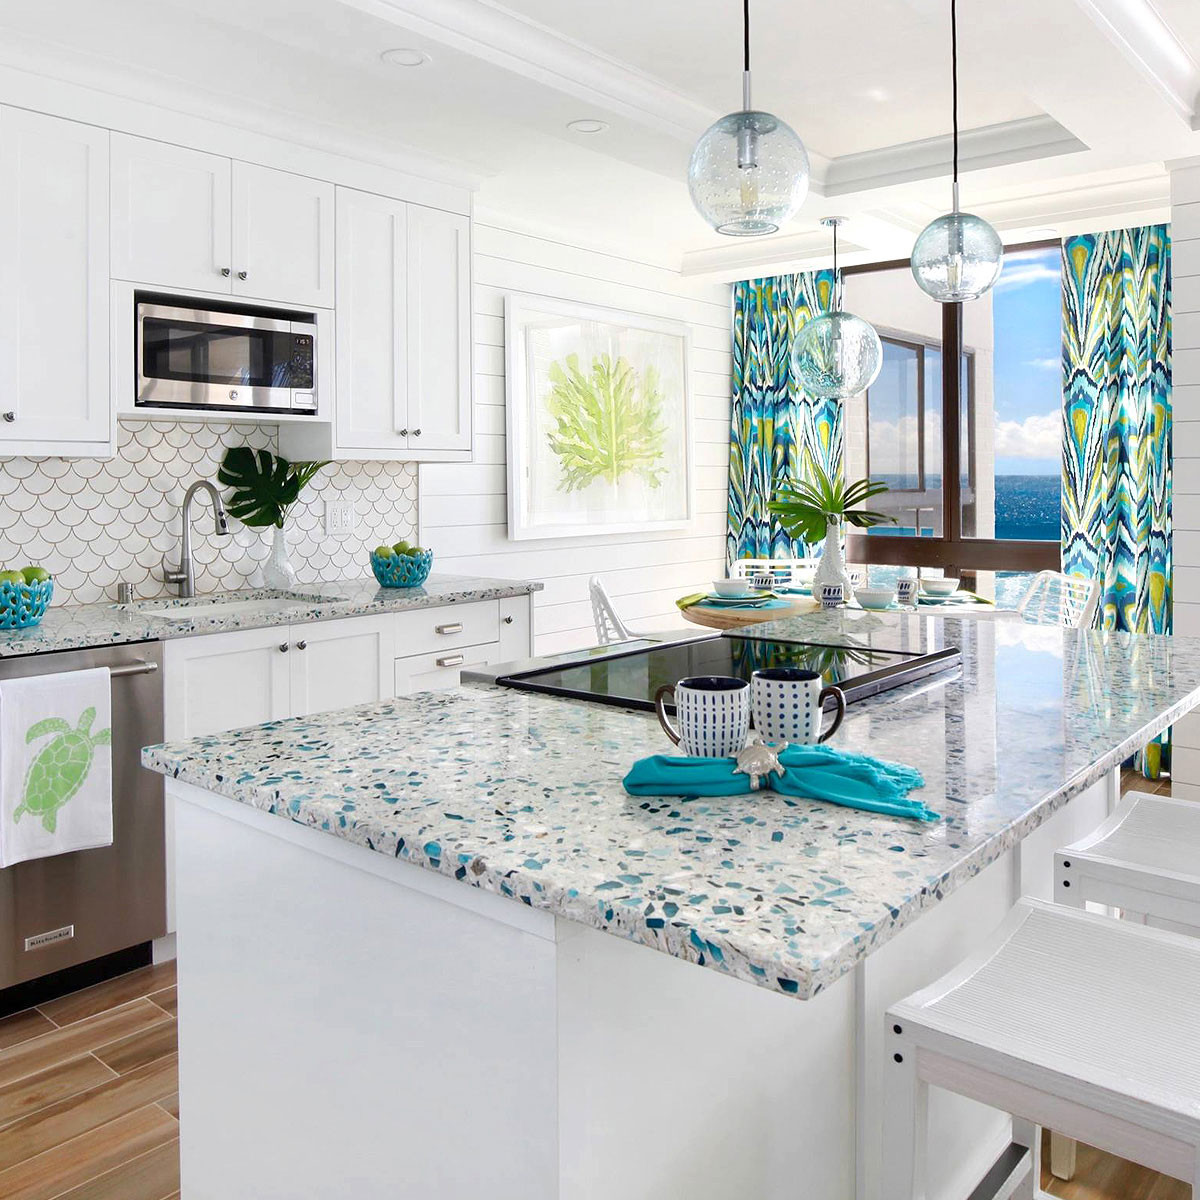 Recycled Glass Kitchen Countertops
 37 Recycled GLASS COUNTERTOP Ideas Designs Tips & Advice